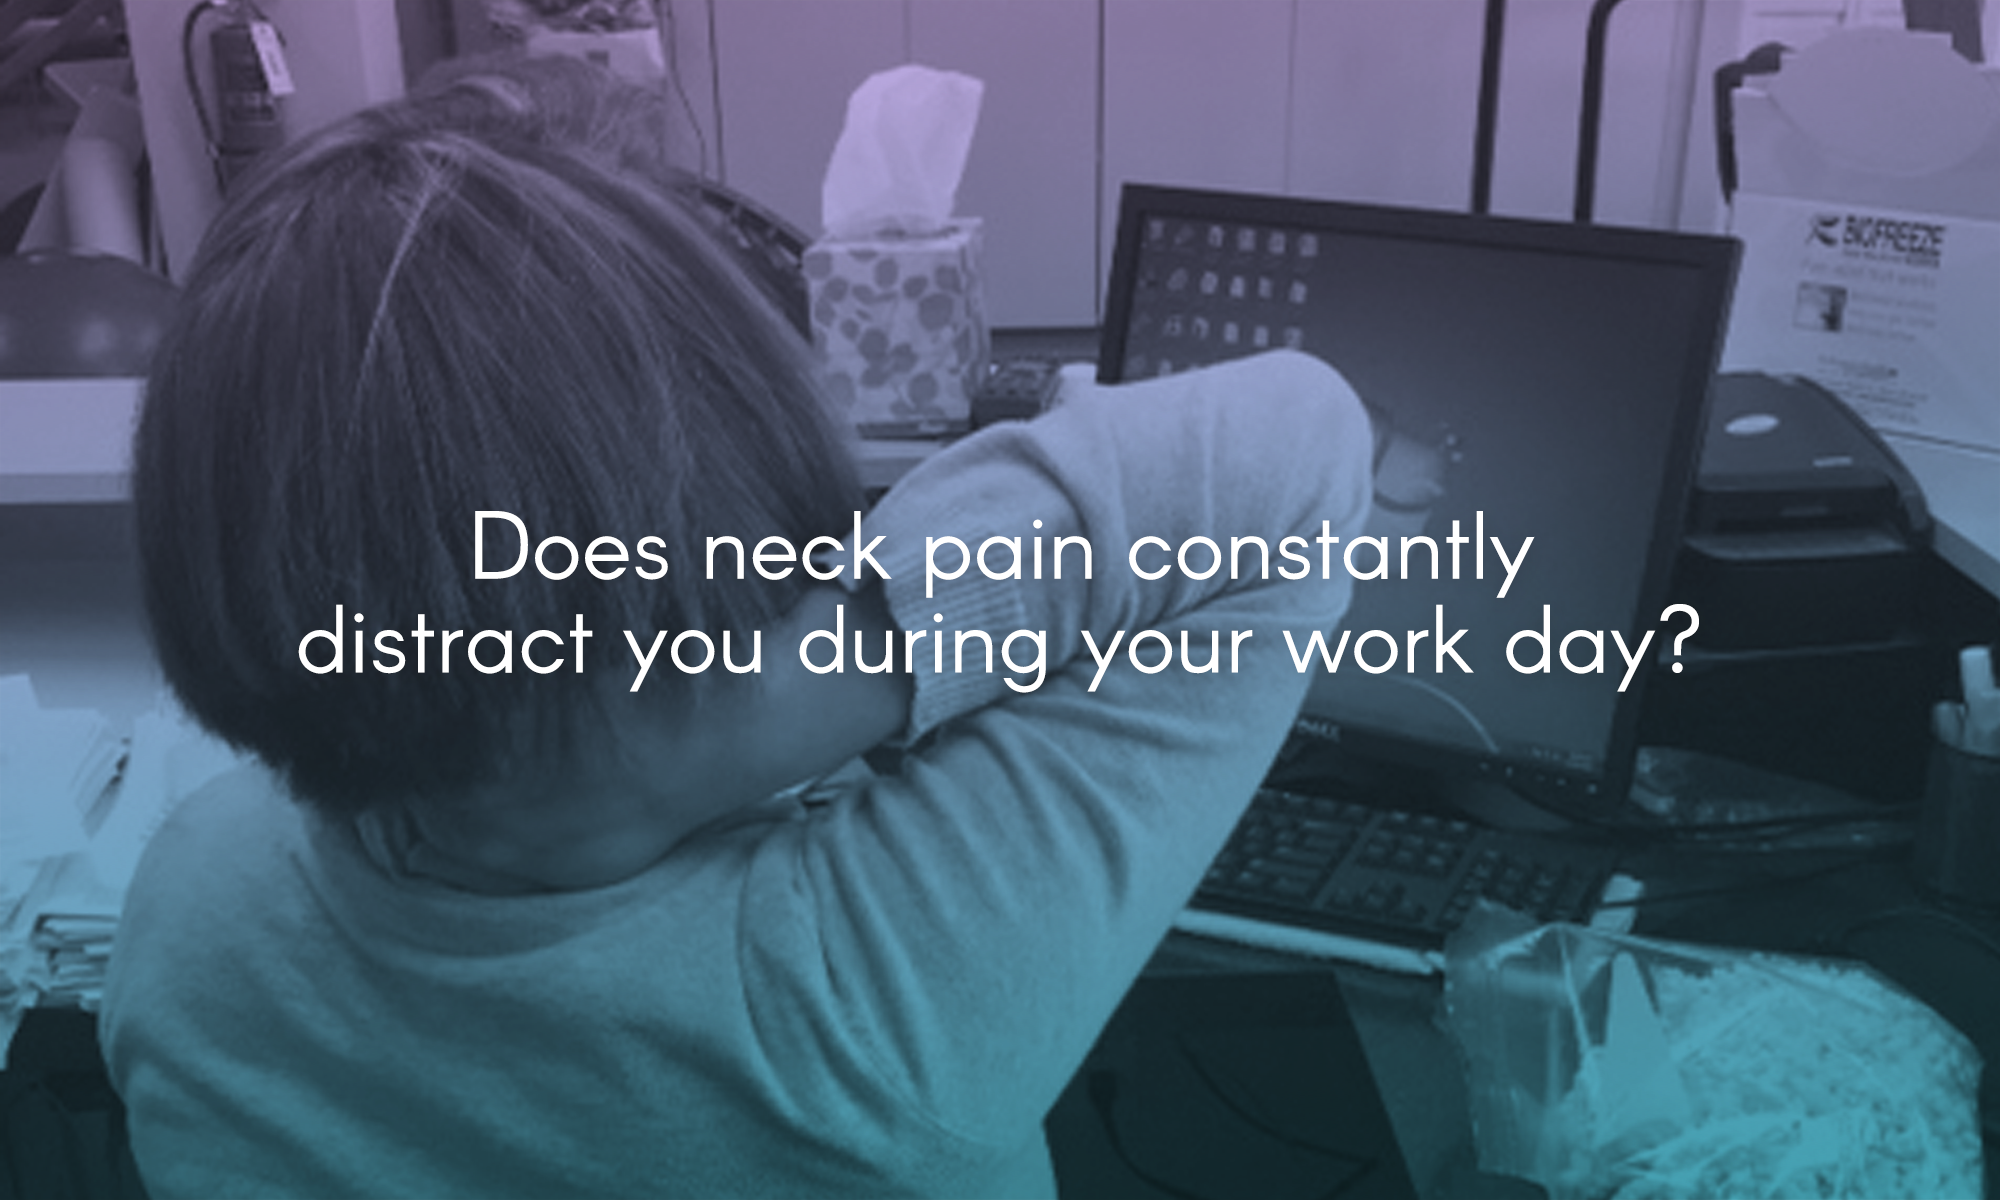  Does neck pain constantly distract you during your work day? 